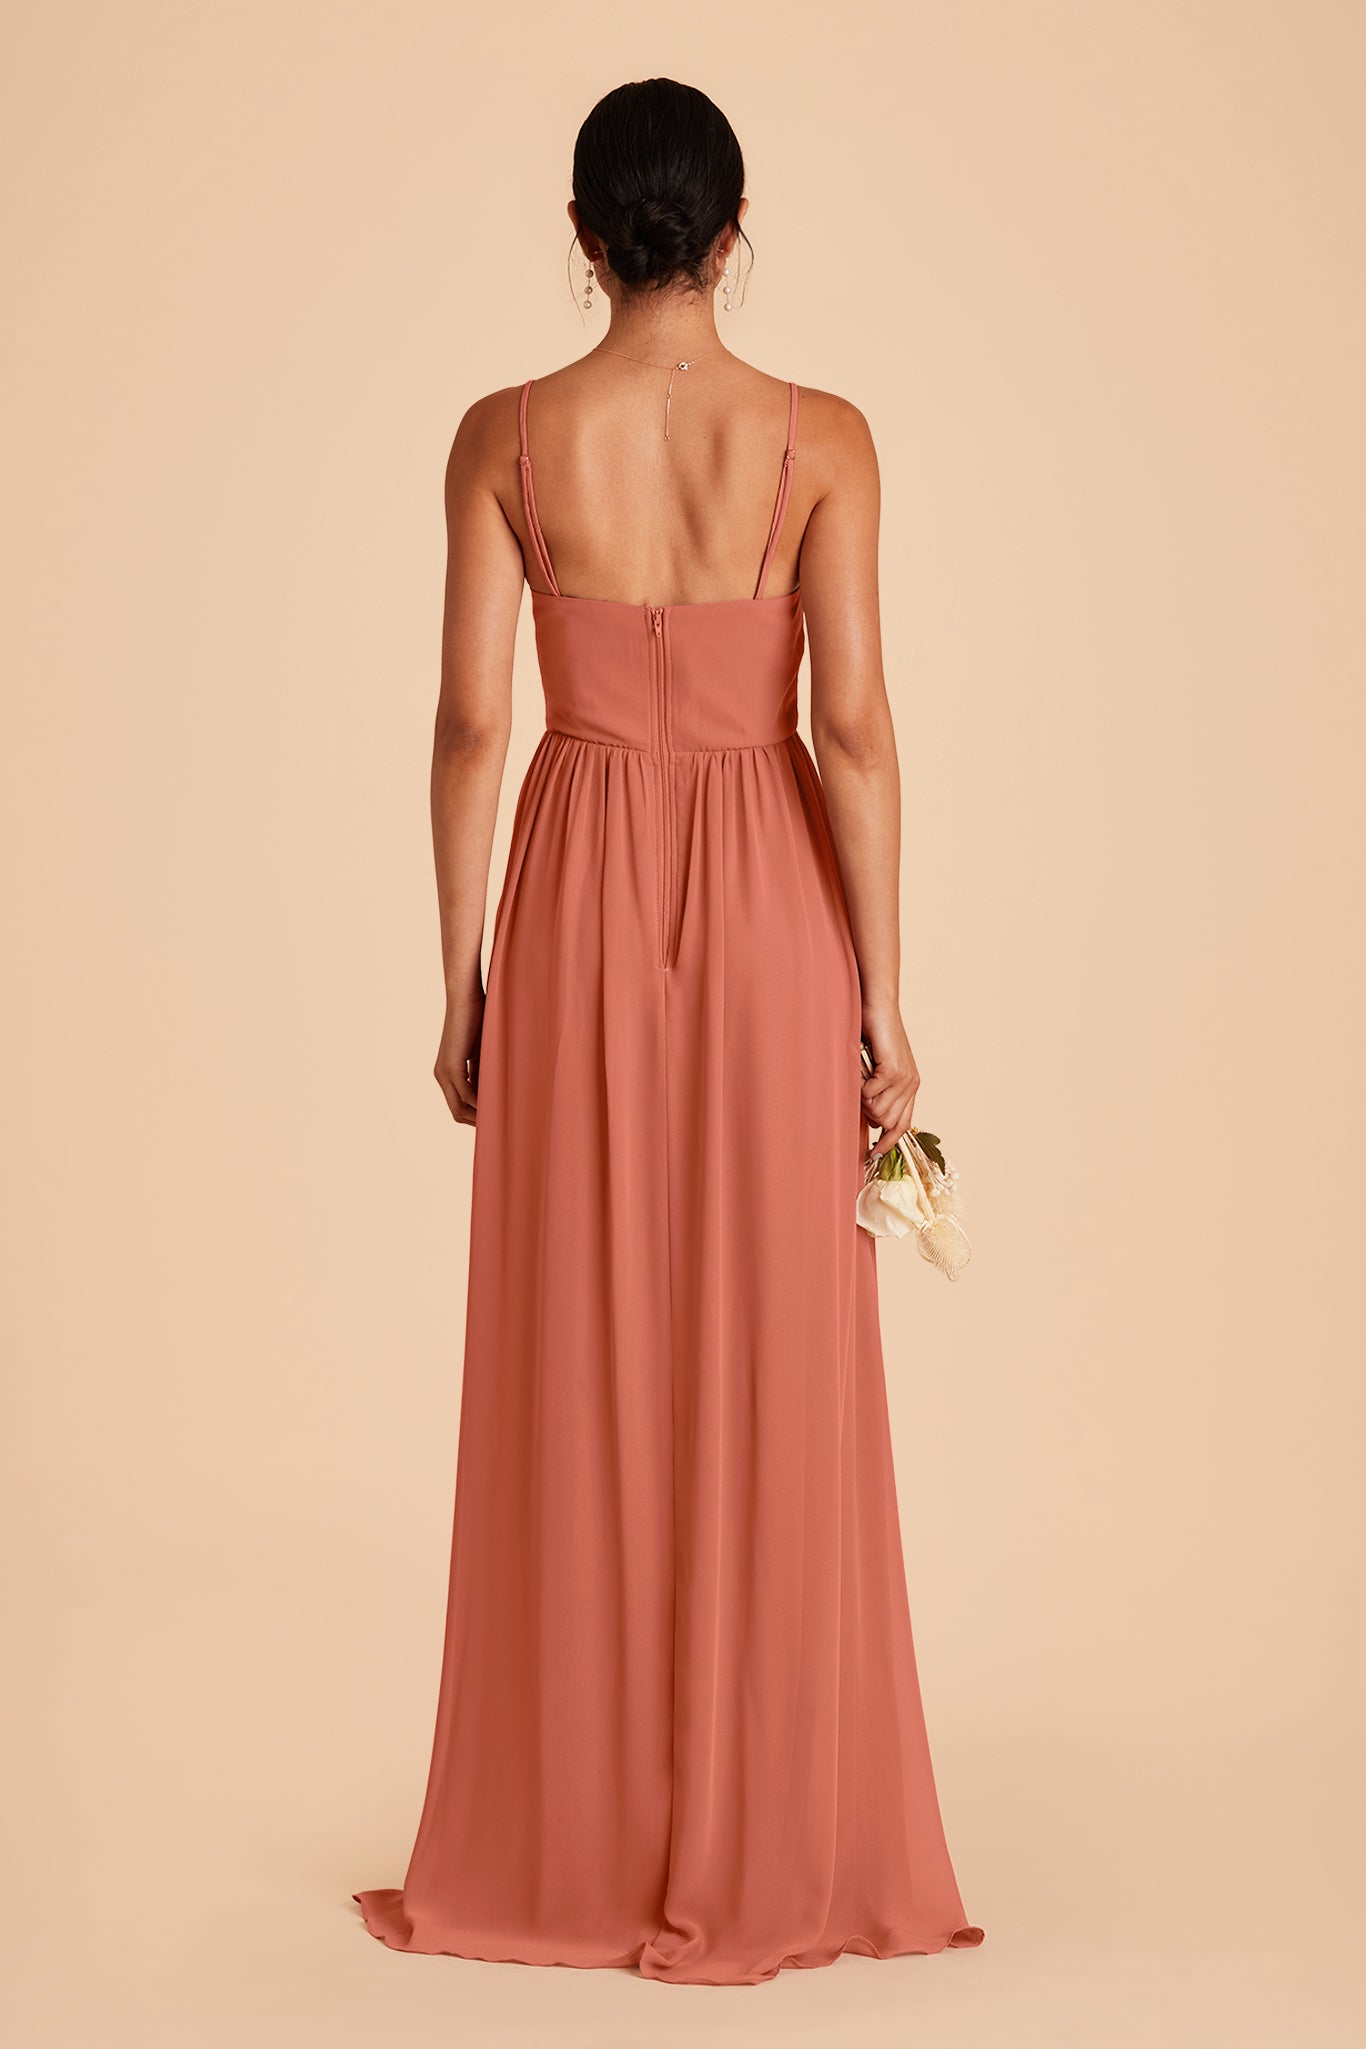 August bridesmaid dress with slit in terracotta chiffon by Birdy Grey, back view